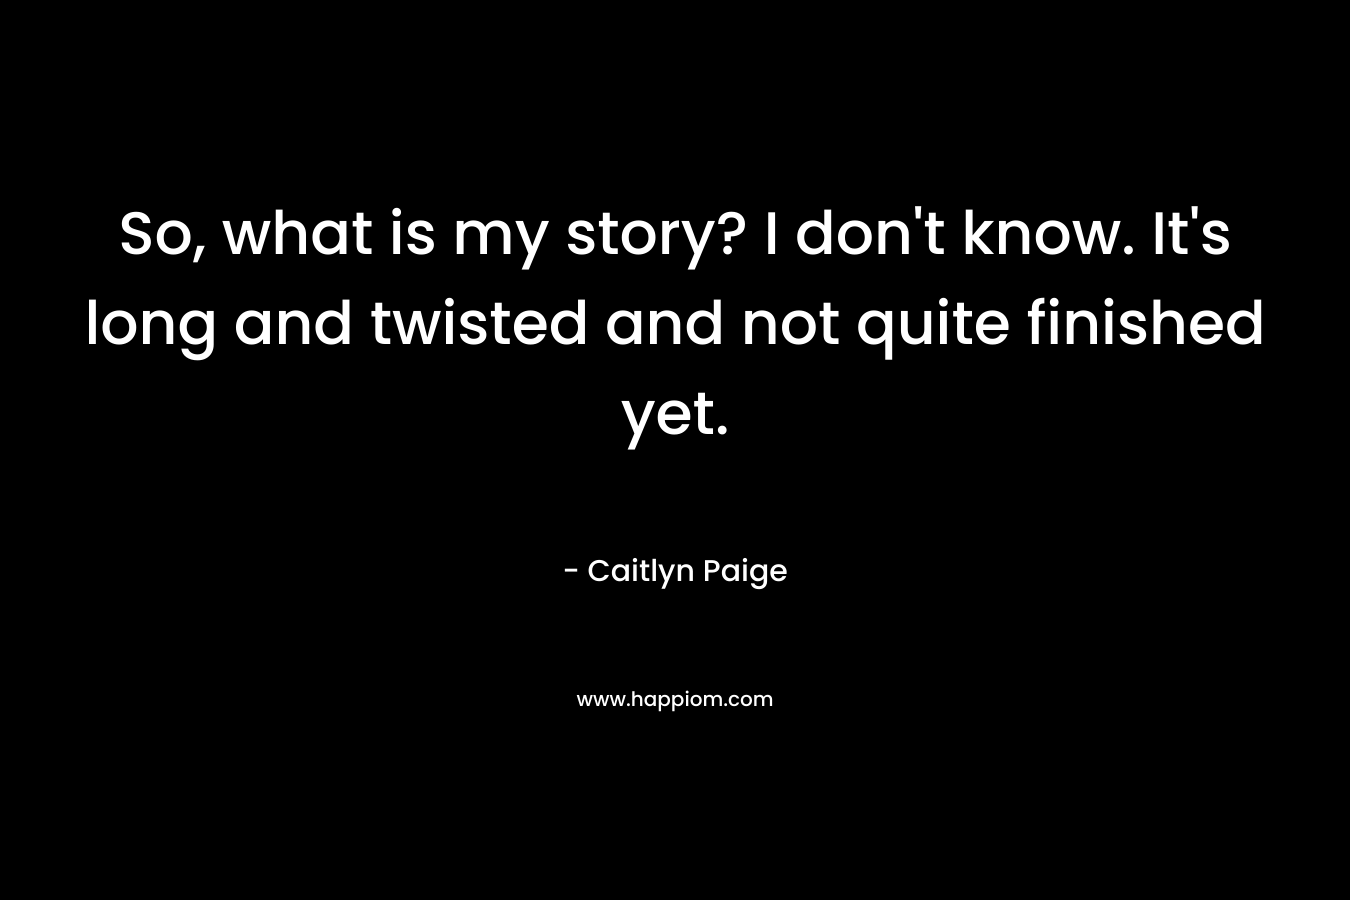 So, what is my story? I don't know. It's long and twisted and not quite finished yet.